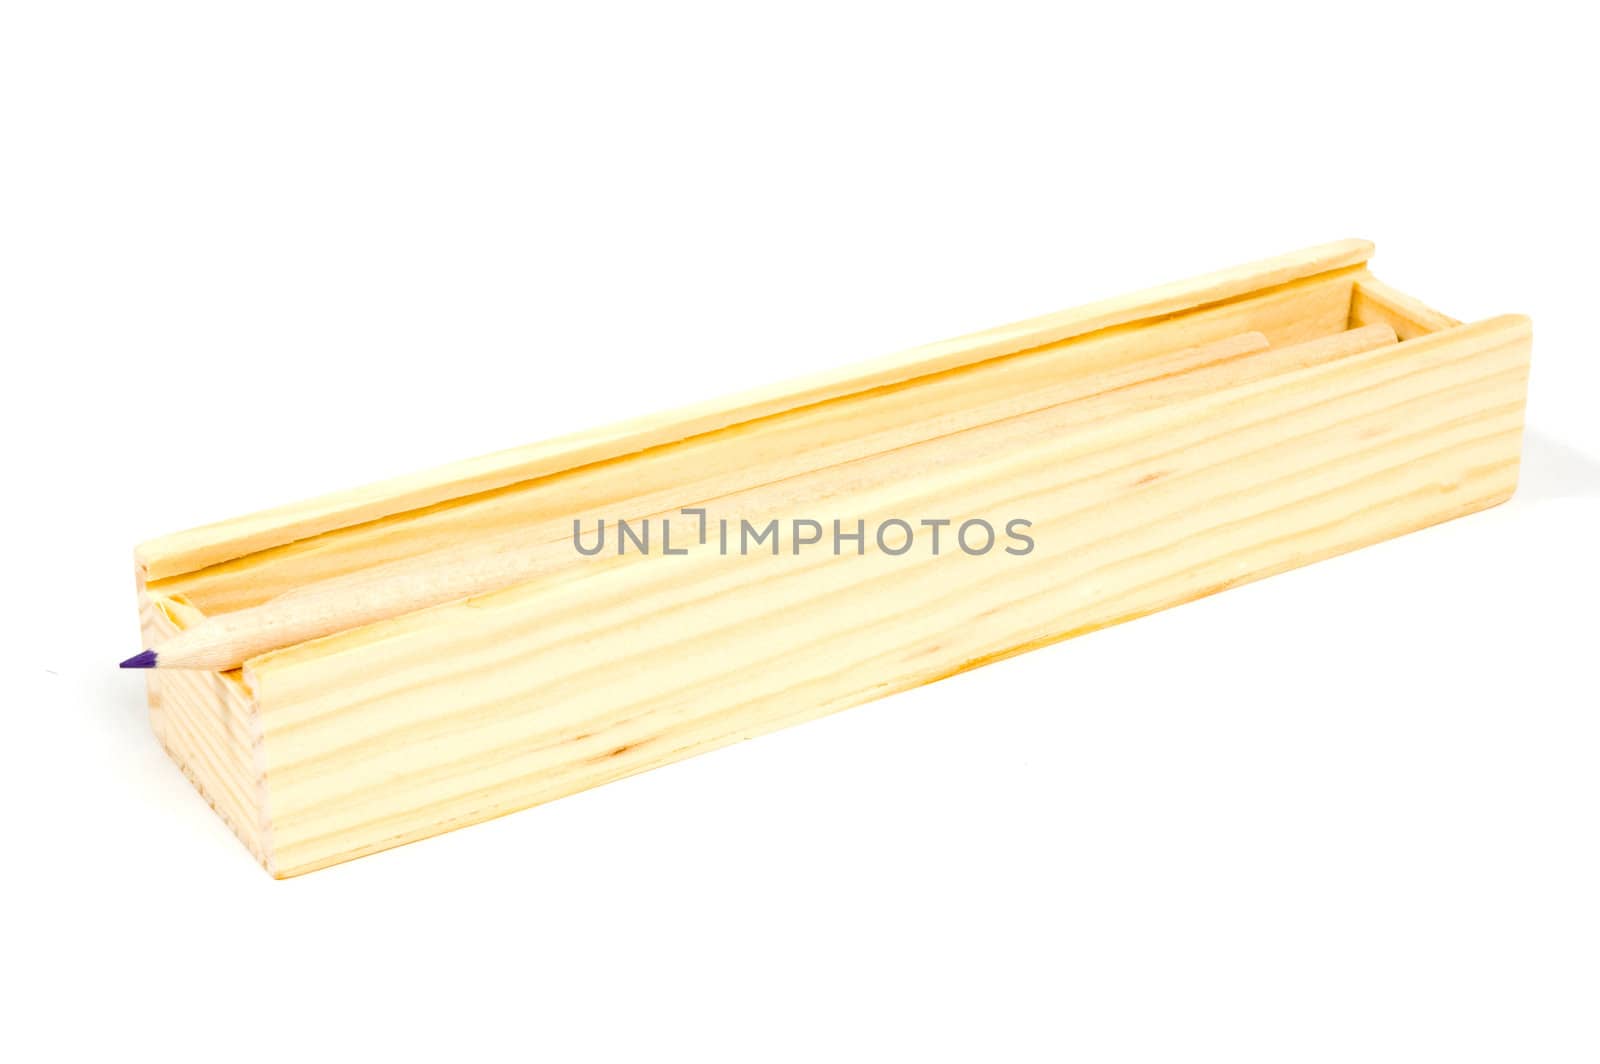  pencils in an old wooden school box isolated on white